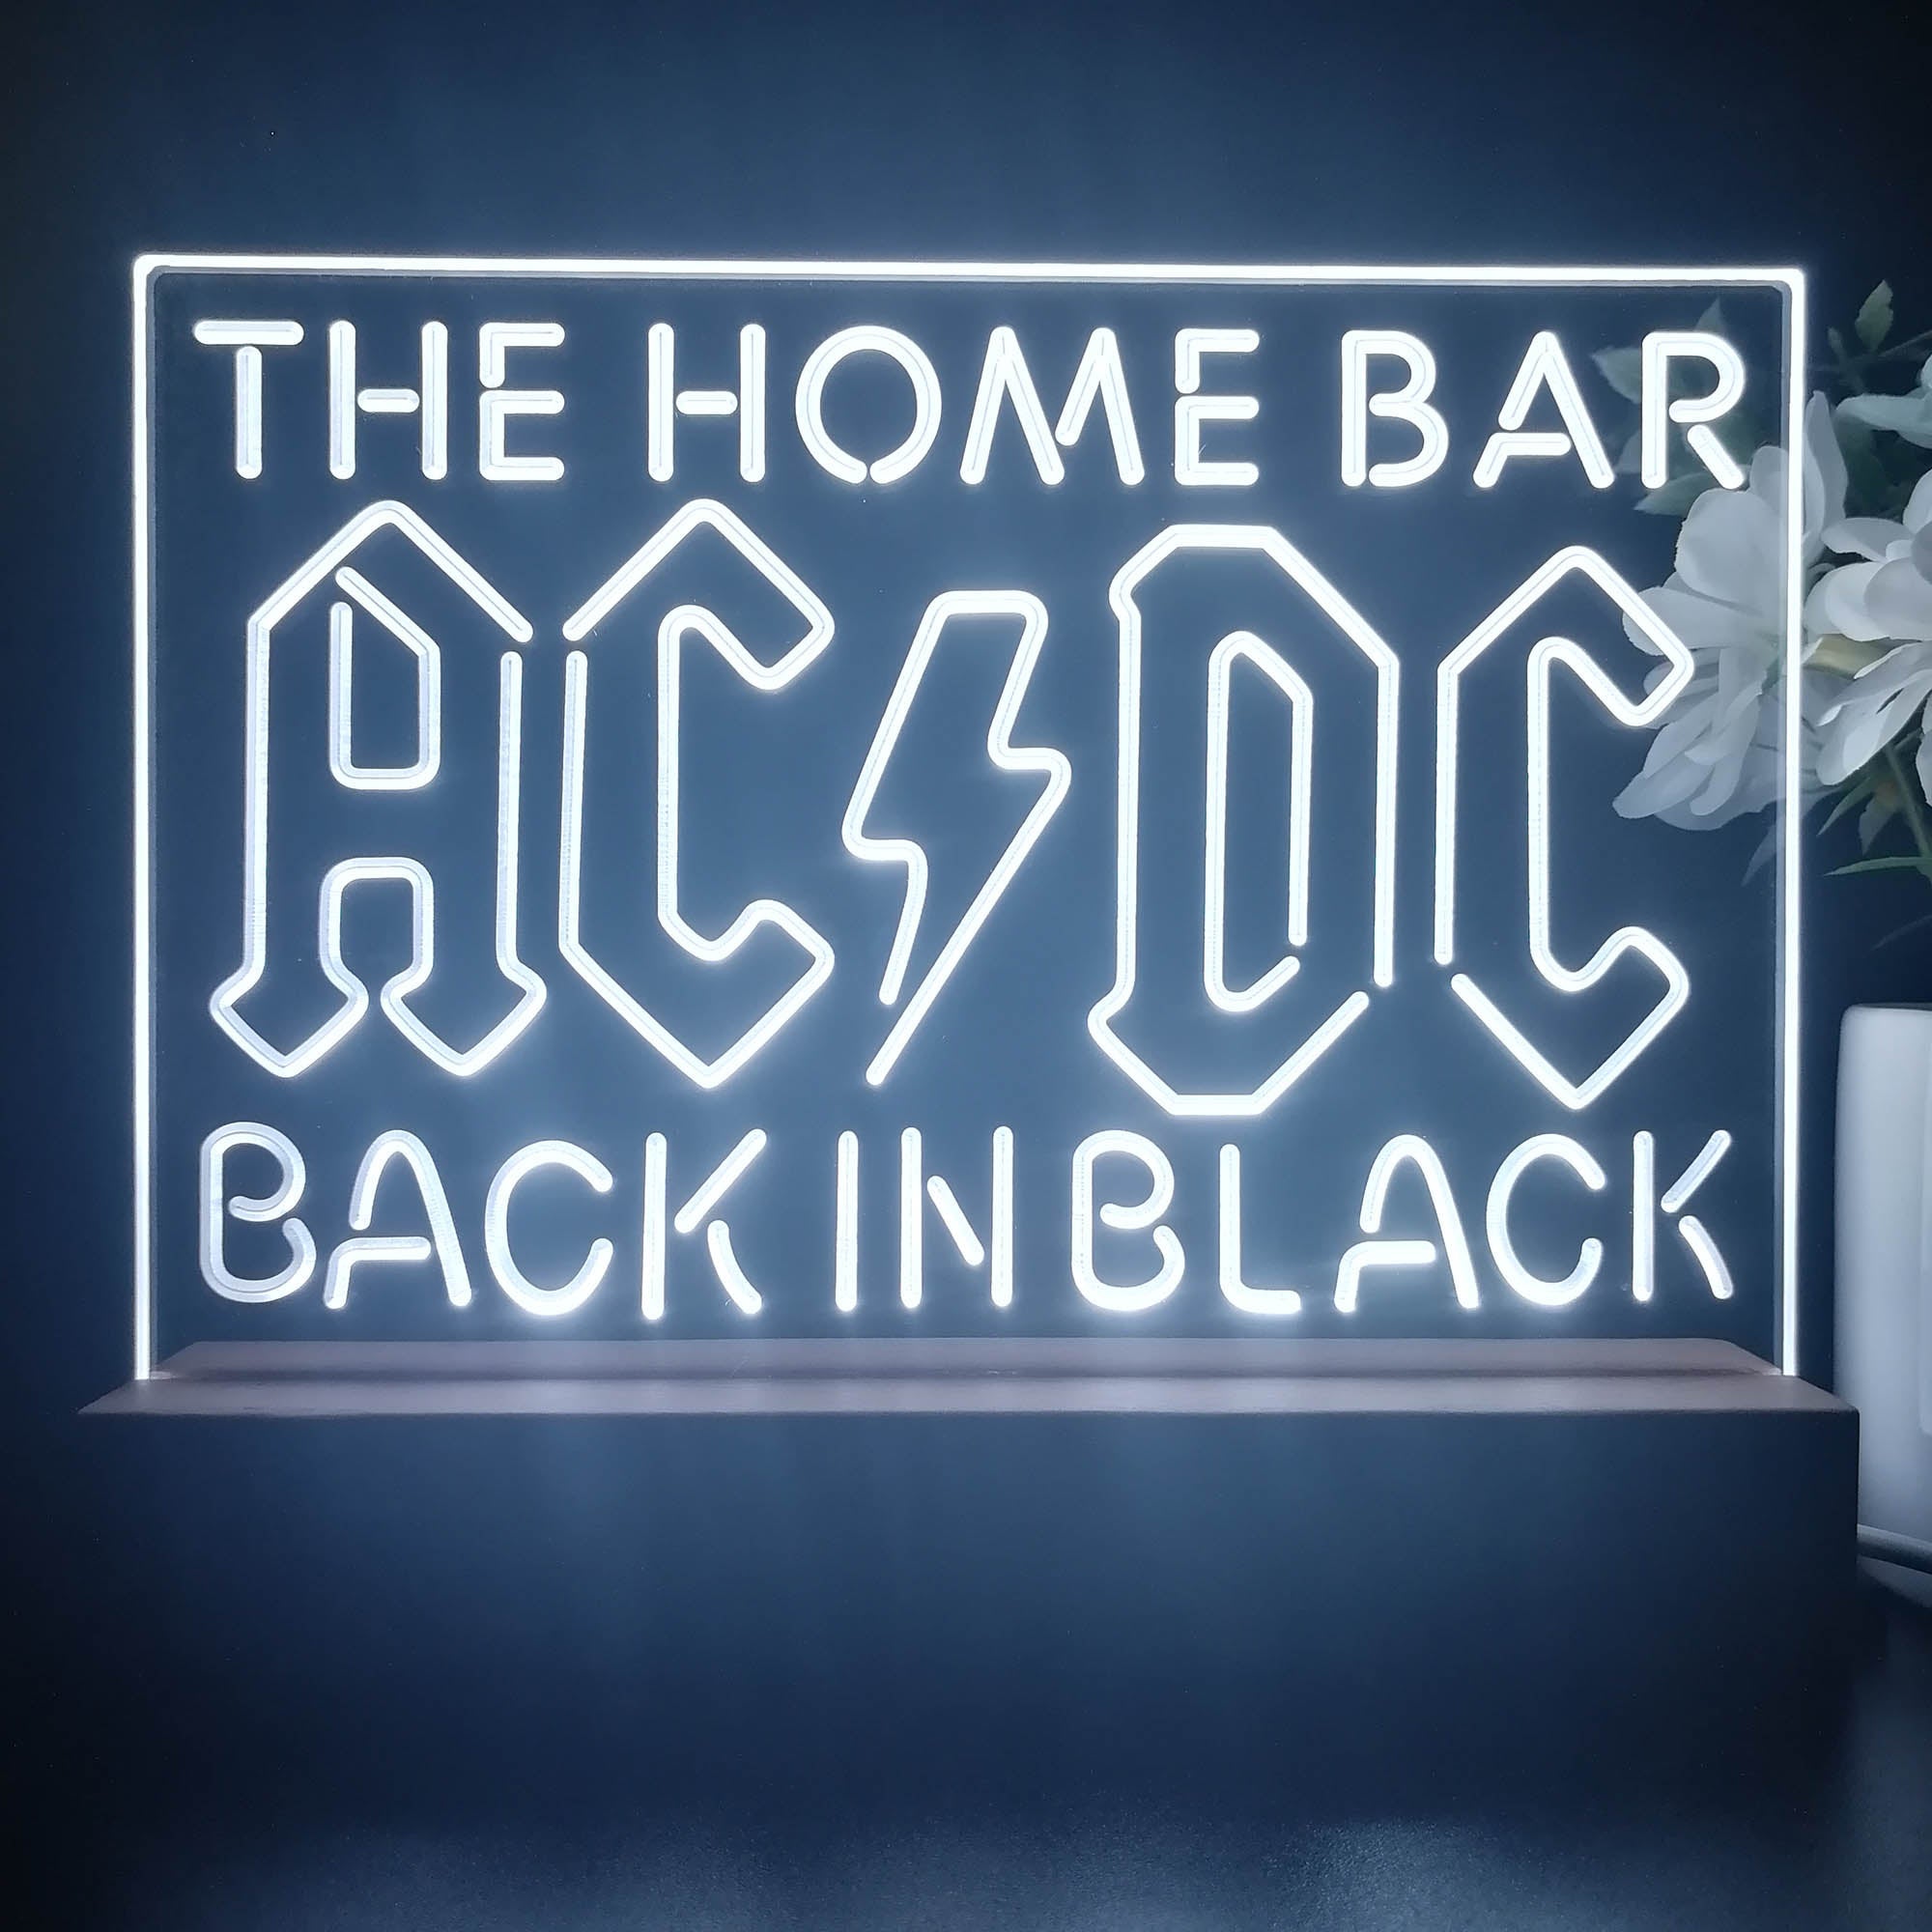 Personalized ACDC Back In Black Souvenir Neon LED Night Light Sign